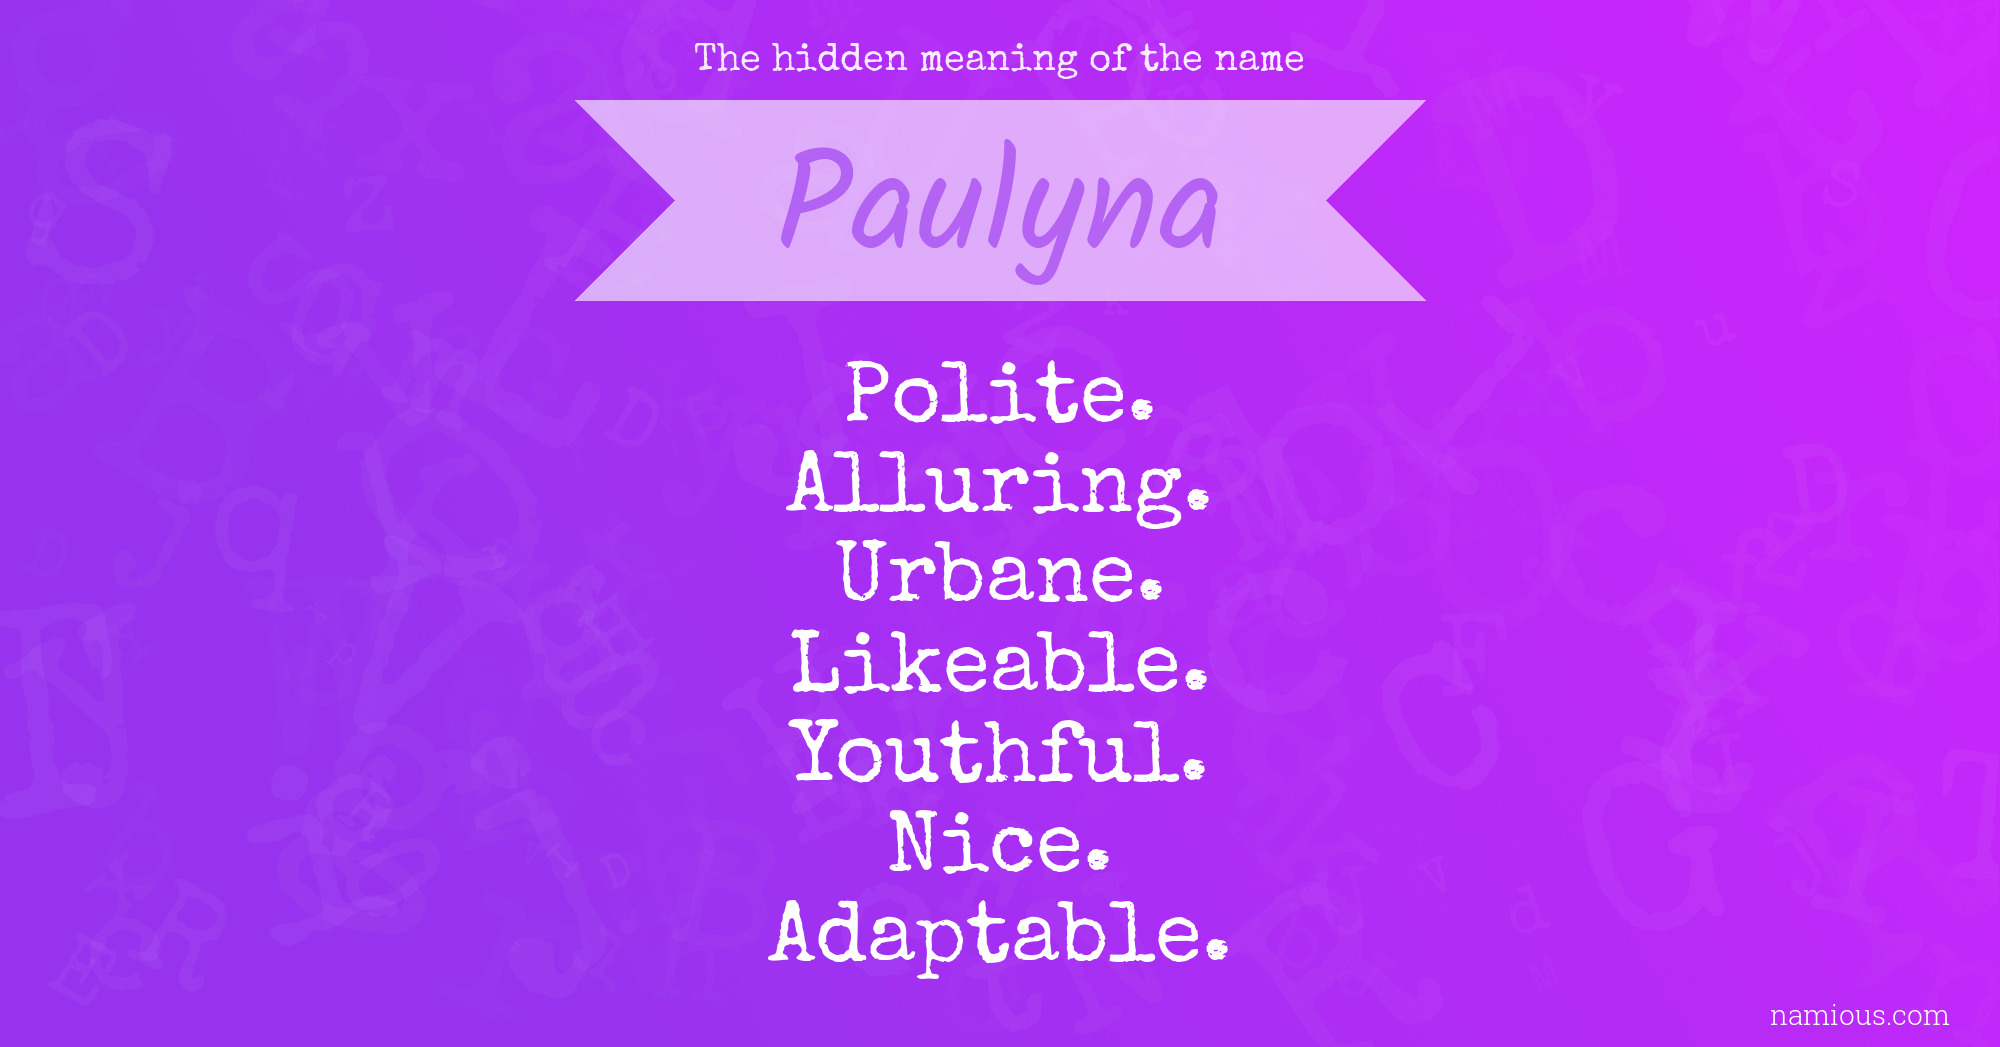 The hidden meaning of the name Paulyna